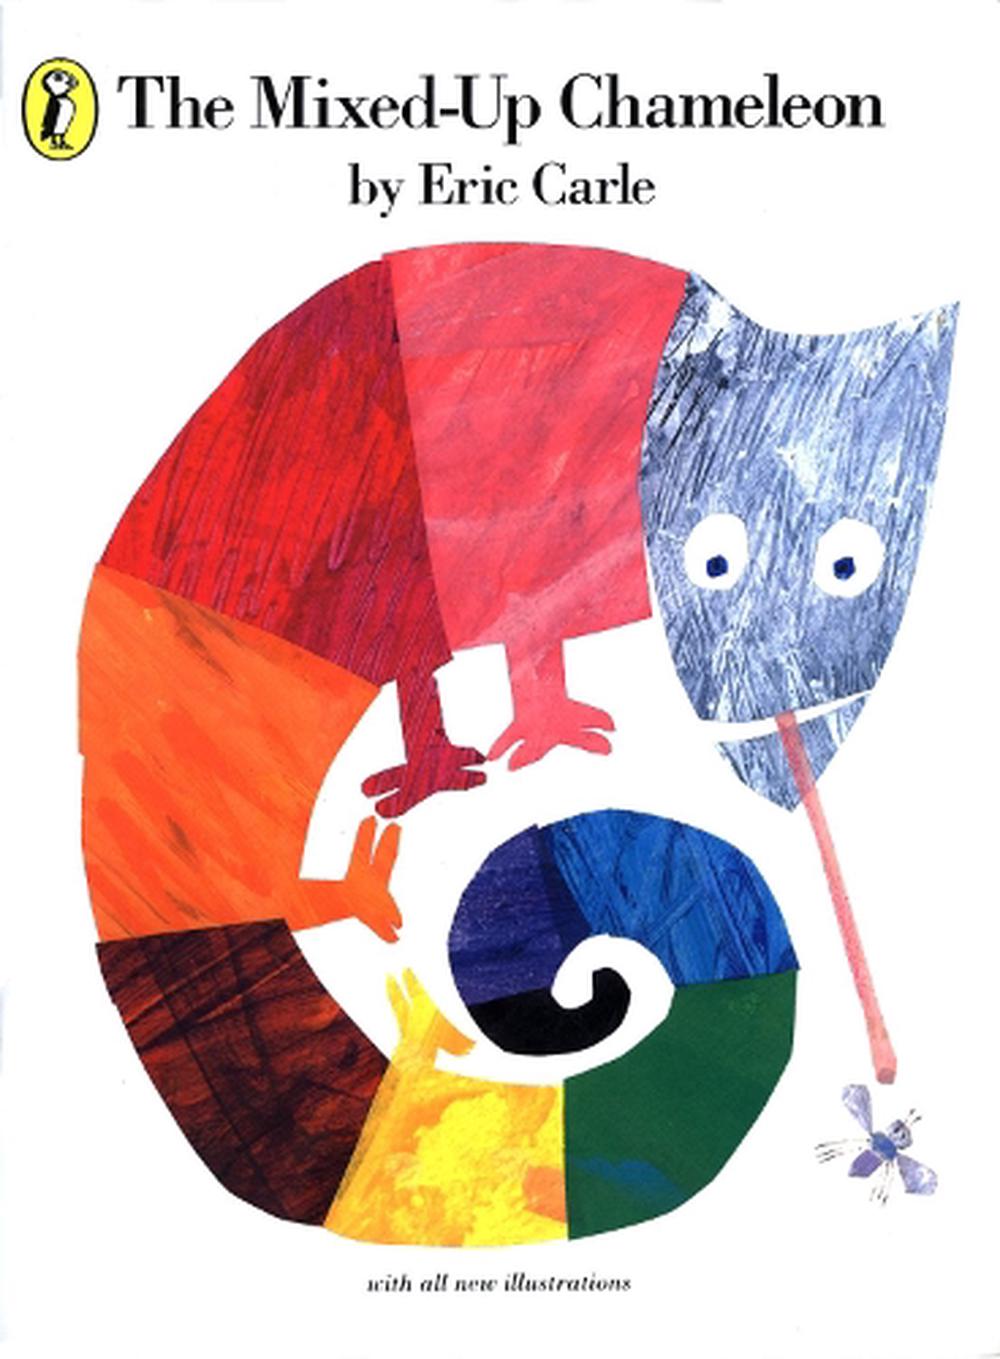 ERIC CARLE ART WORK ~ BOOK COVER POSTCARD ~ 'THE MIXED-UP CHAMELEON' ~ NEW 